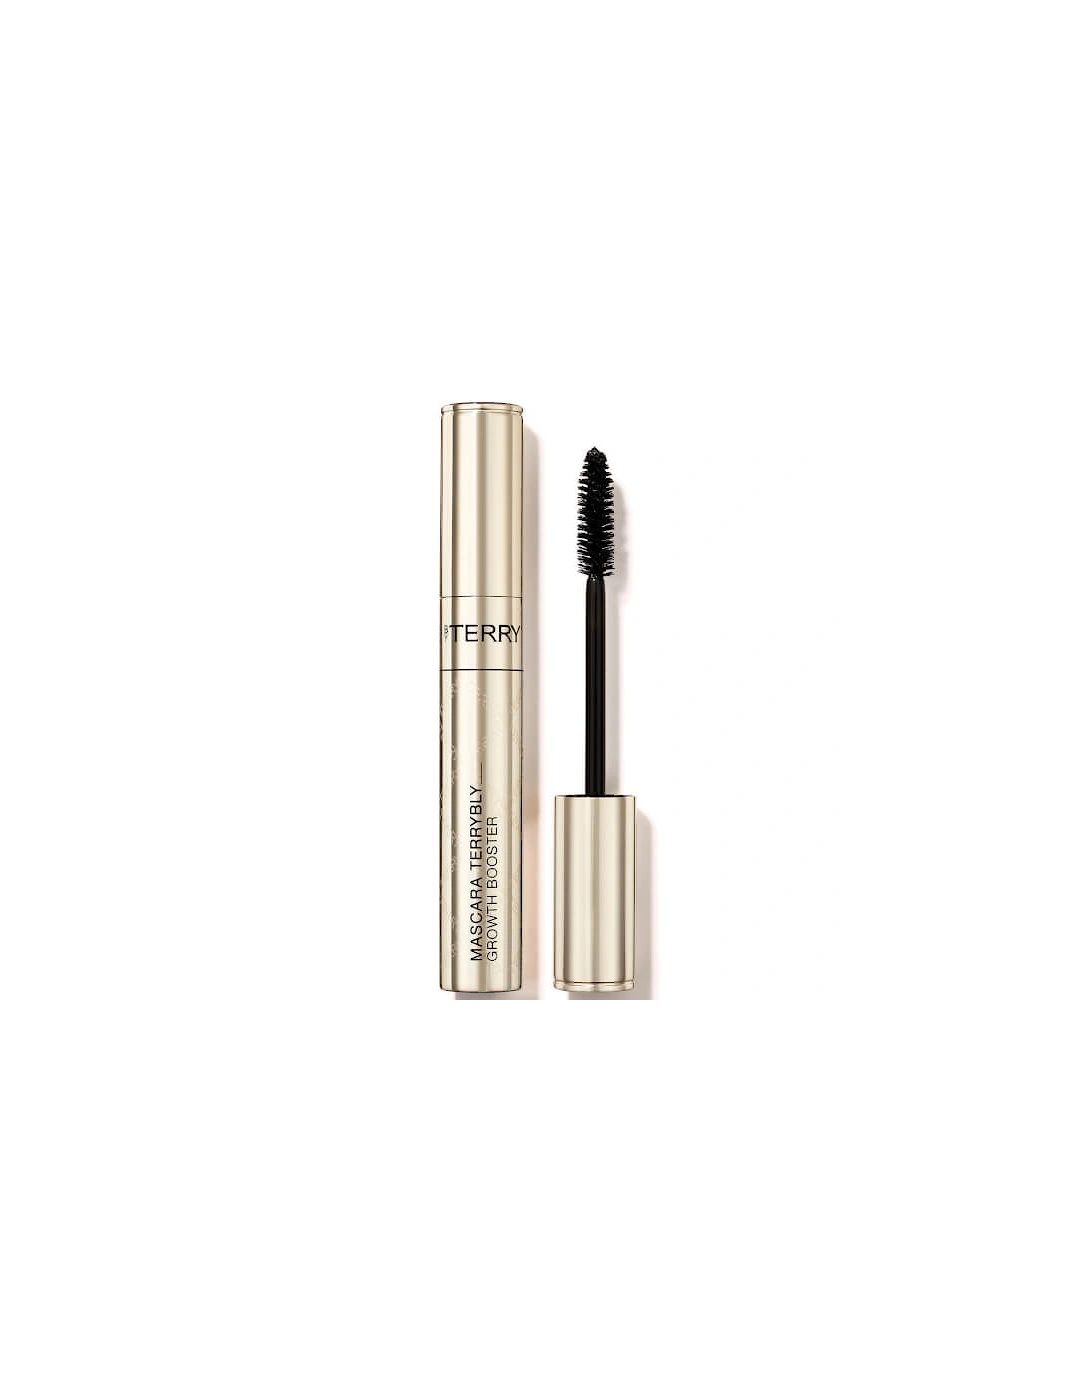 By Terry Terrybly Mascara - 1. Black Parti-Pris - By Terry - By Terry Terrybly Mascara - 1. Black Parti-Pris - By Terry Terrybly Mascara - 2. Moka Brown - By Terry Terrybly Mascara - 3. Terrybleu - By Terry Terrybly Mascara - 4. Purple Success - By Terry Terrybly Liquid Mascara - Mystic Orchid - By Terry Terrybly Liquid Mascara - Terryfic Blue - By Terry Terrybly Liquid Mascara - Green Galaxy, 2 of 1